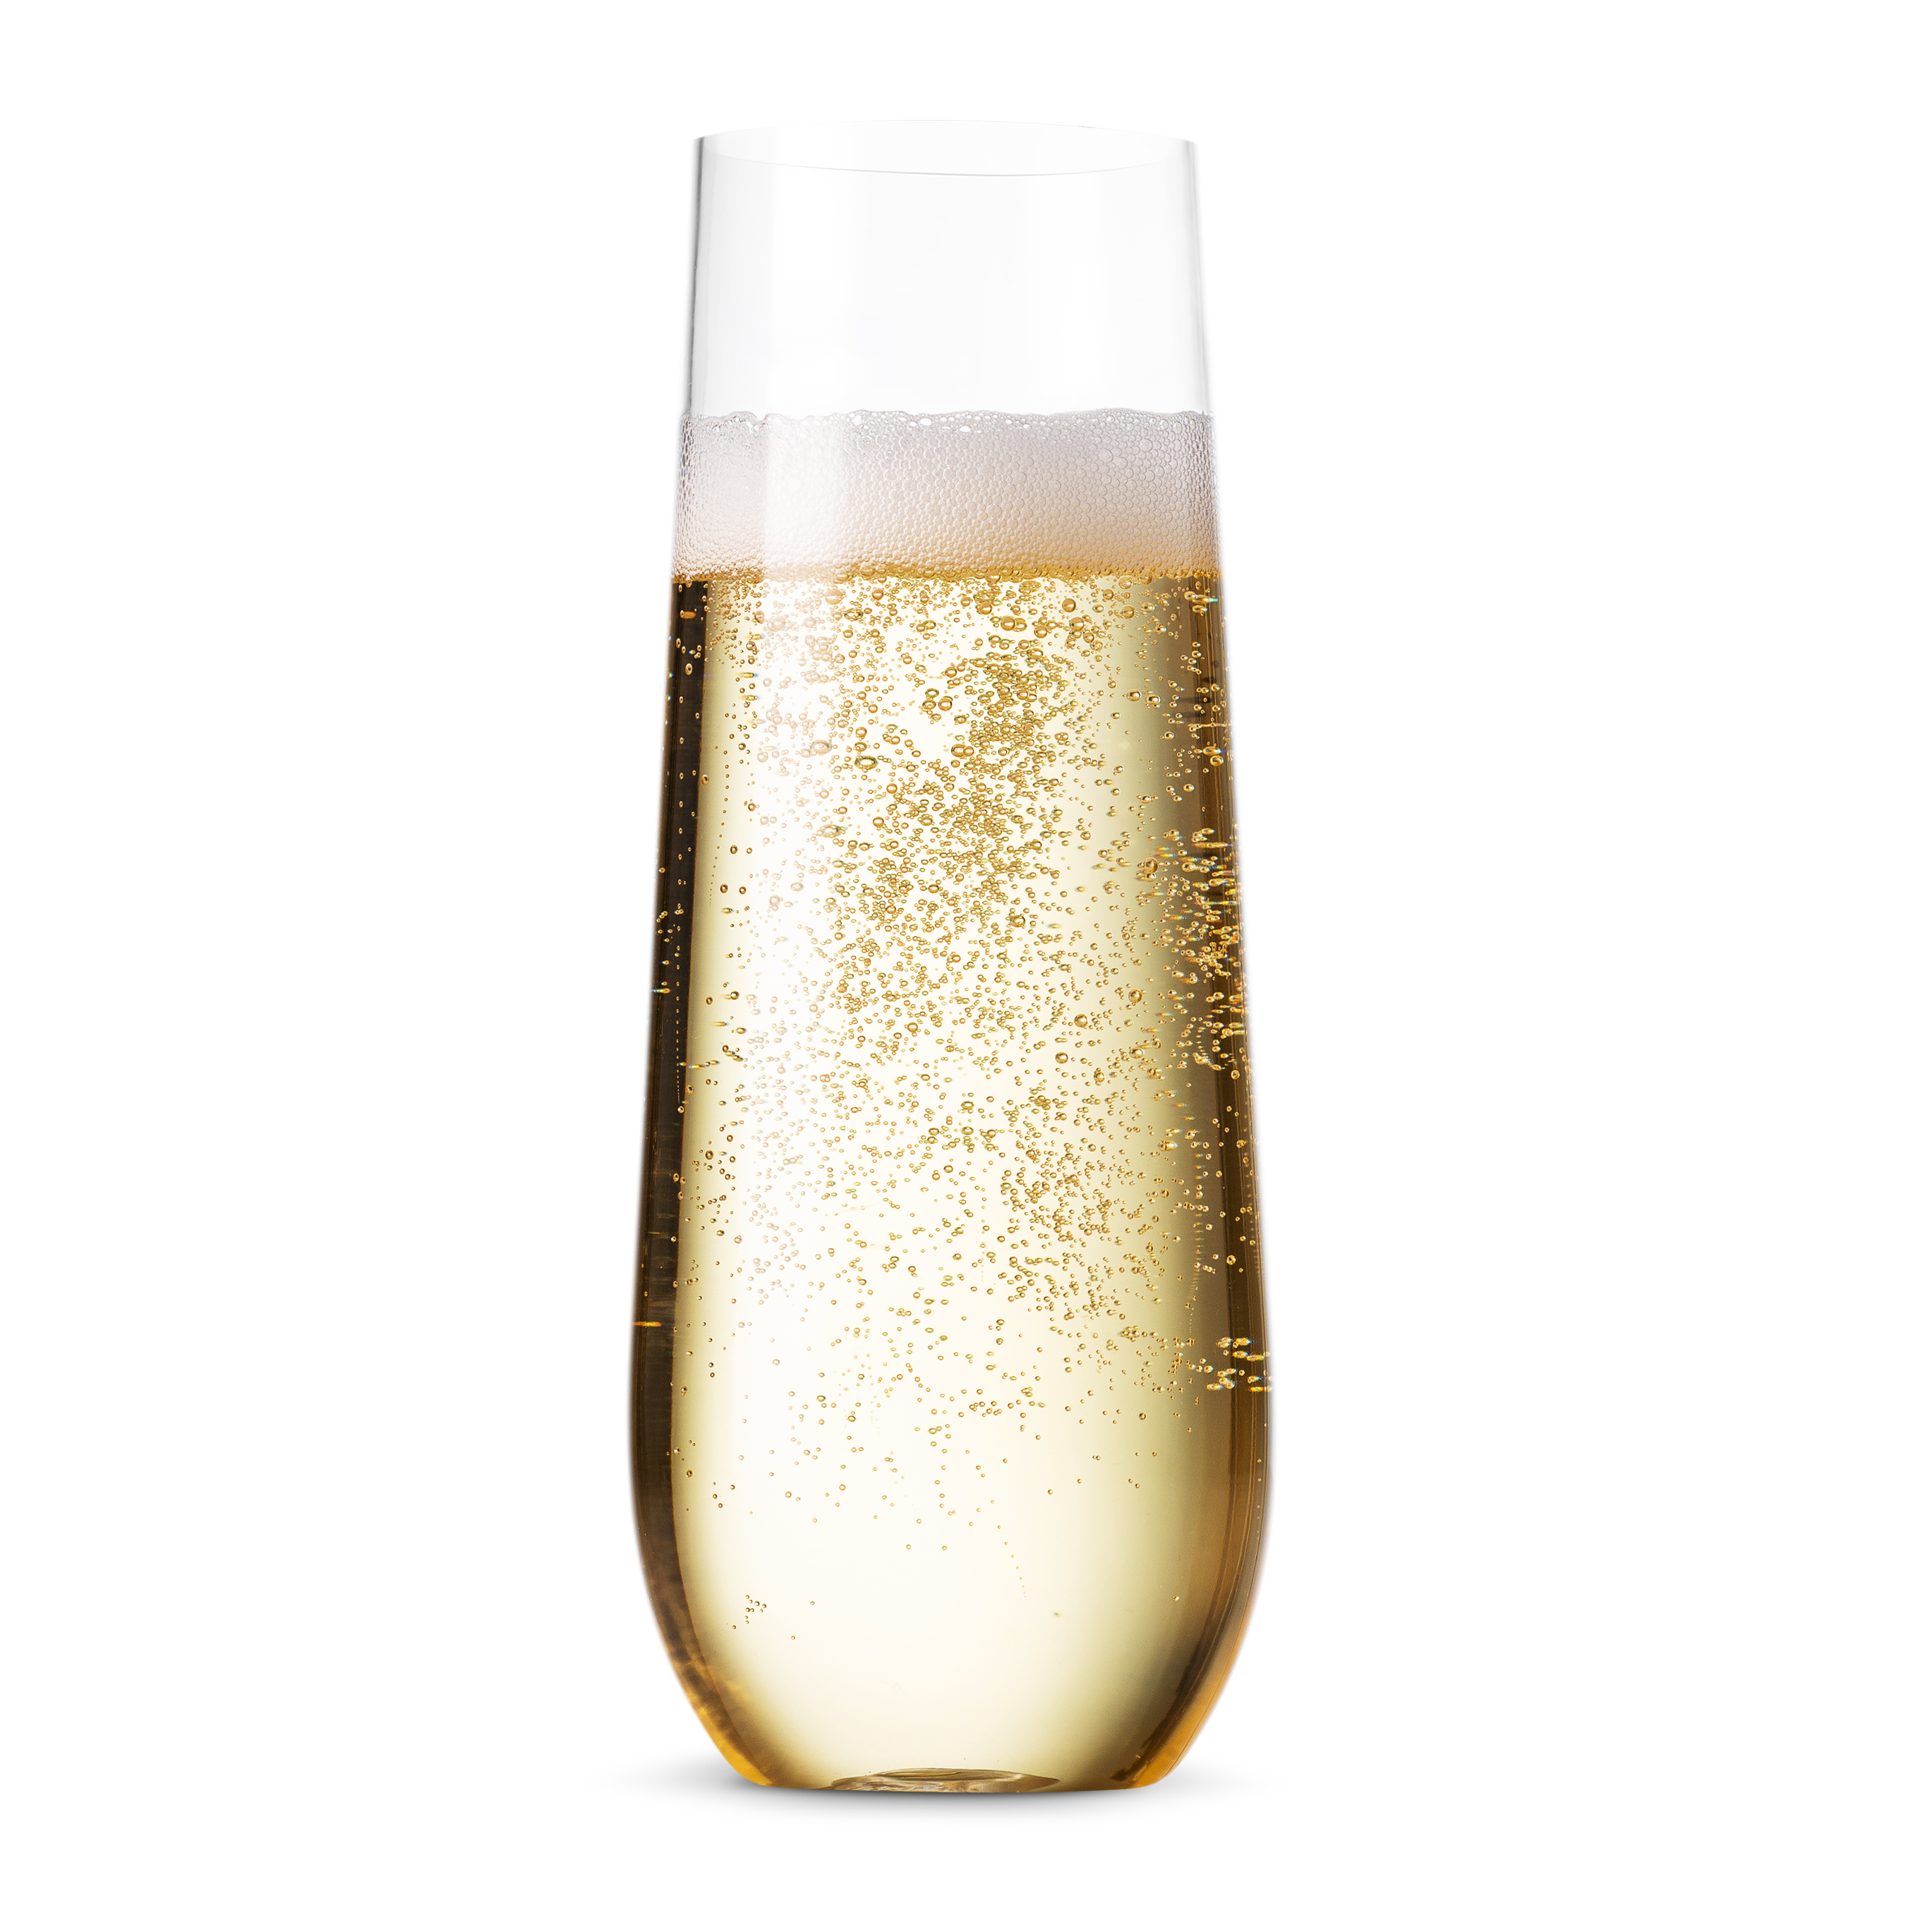 24 Pack Stemless Plastic Champagne Flutes Disposable 9 Oz Clear Plastic Toasting Glasses Shatterproof Recyclable and BPA-Free - image 1 of 3